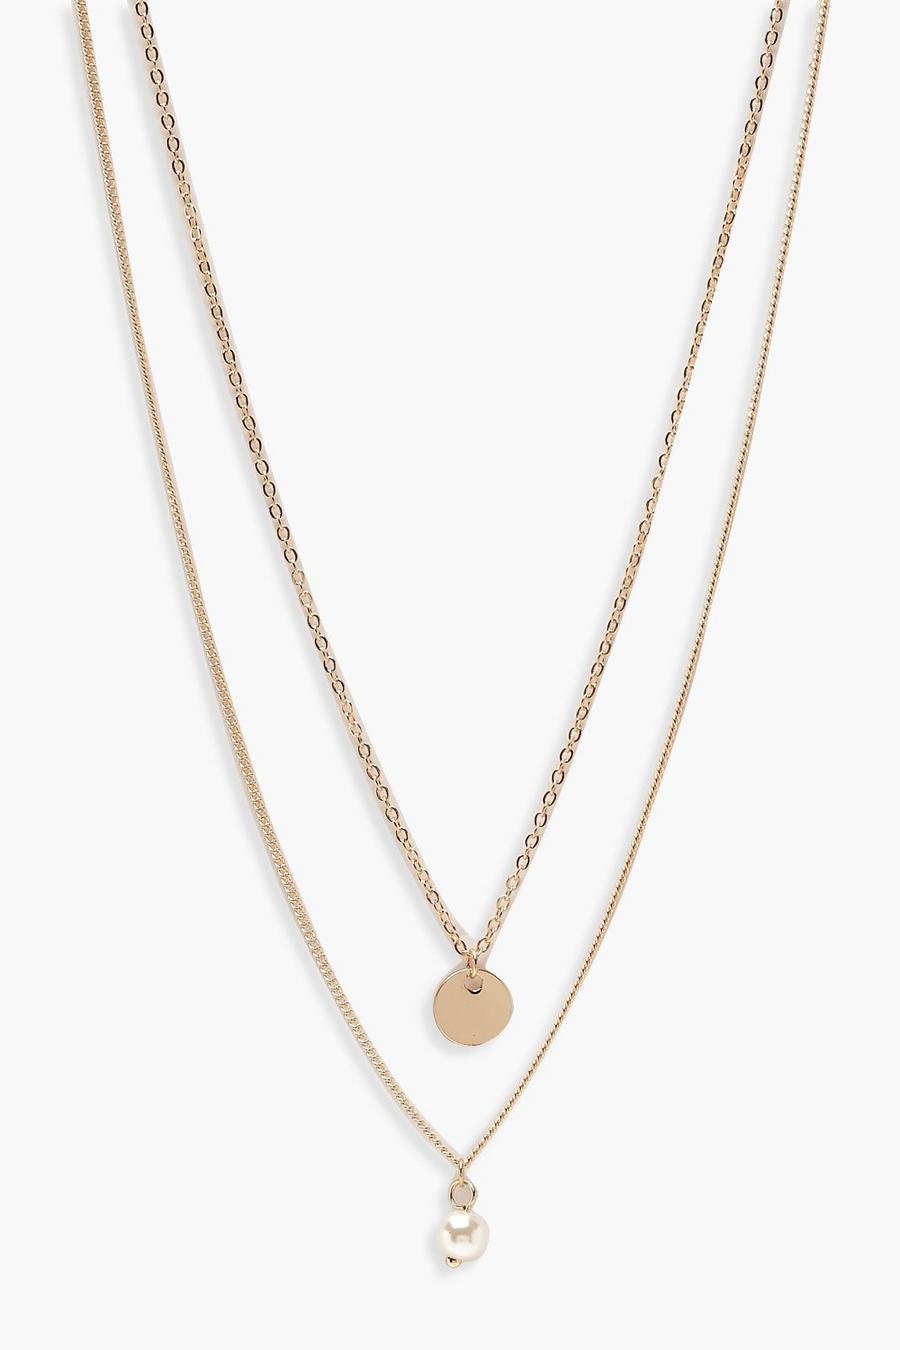 Gold Circle & Pearl Simple Layered Necklace